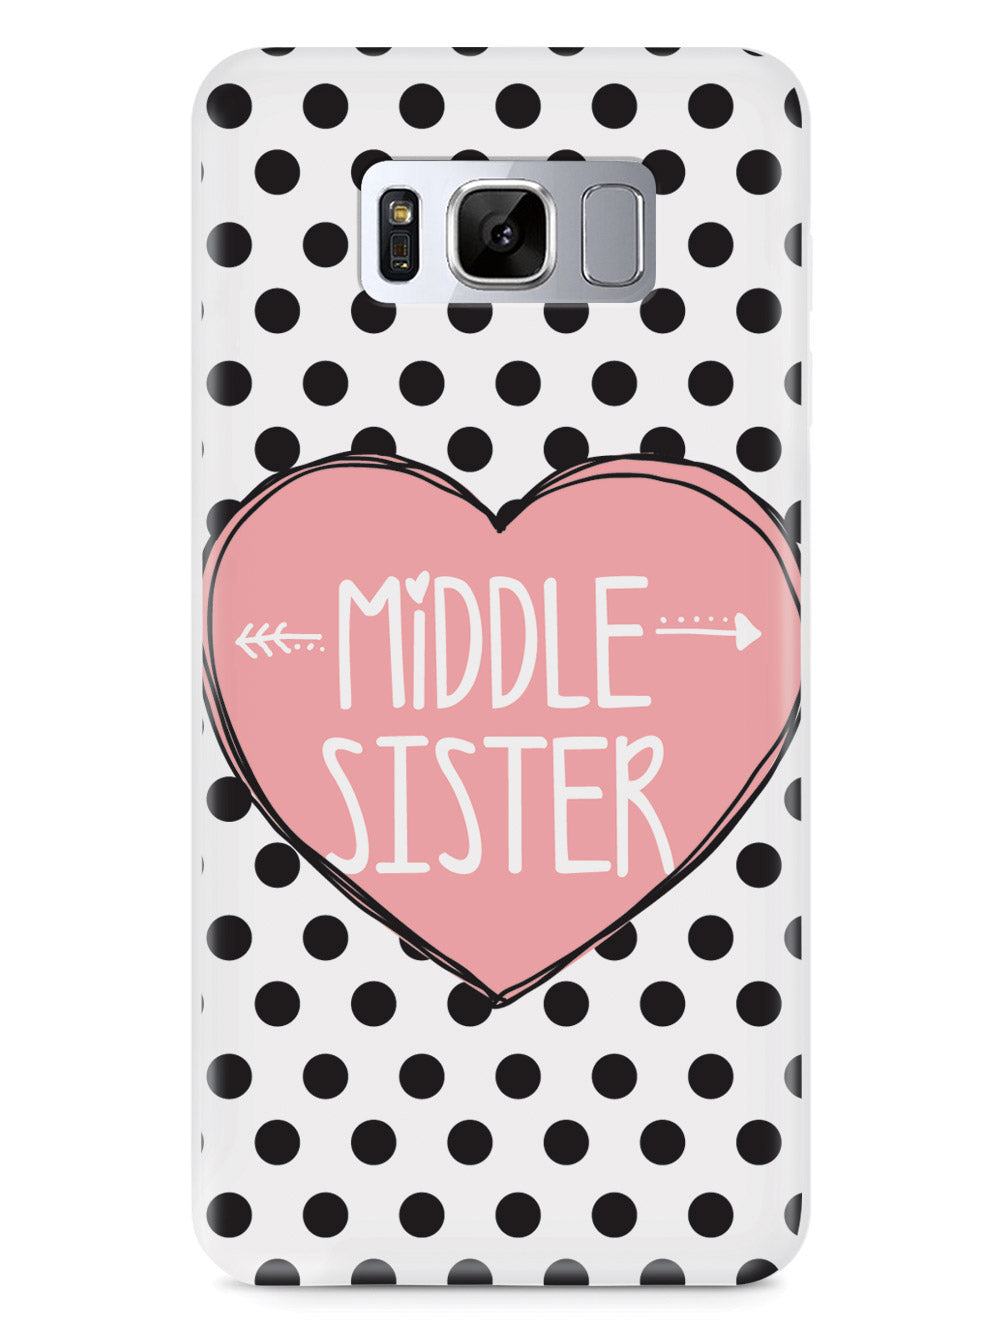 Sisterly Love - Middle Sister - Polka Dots Case